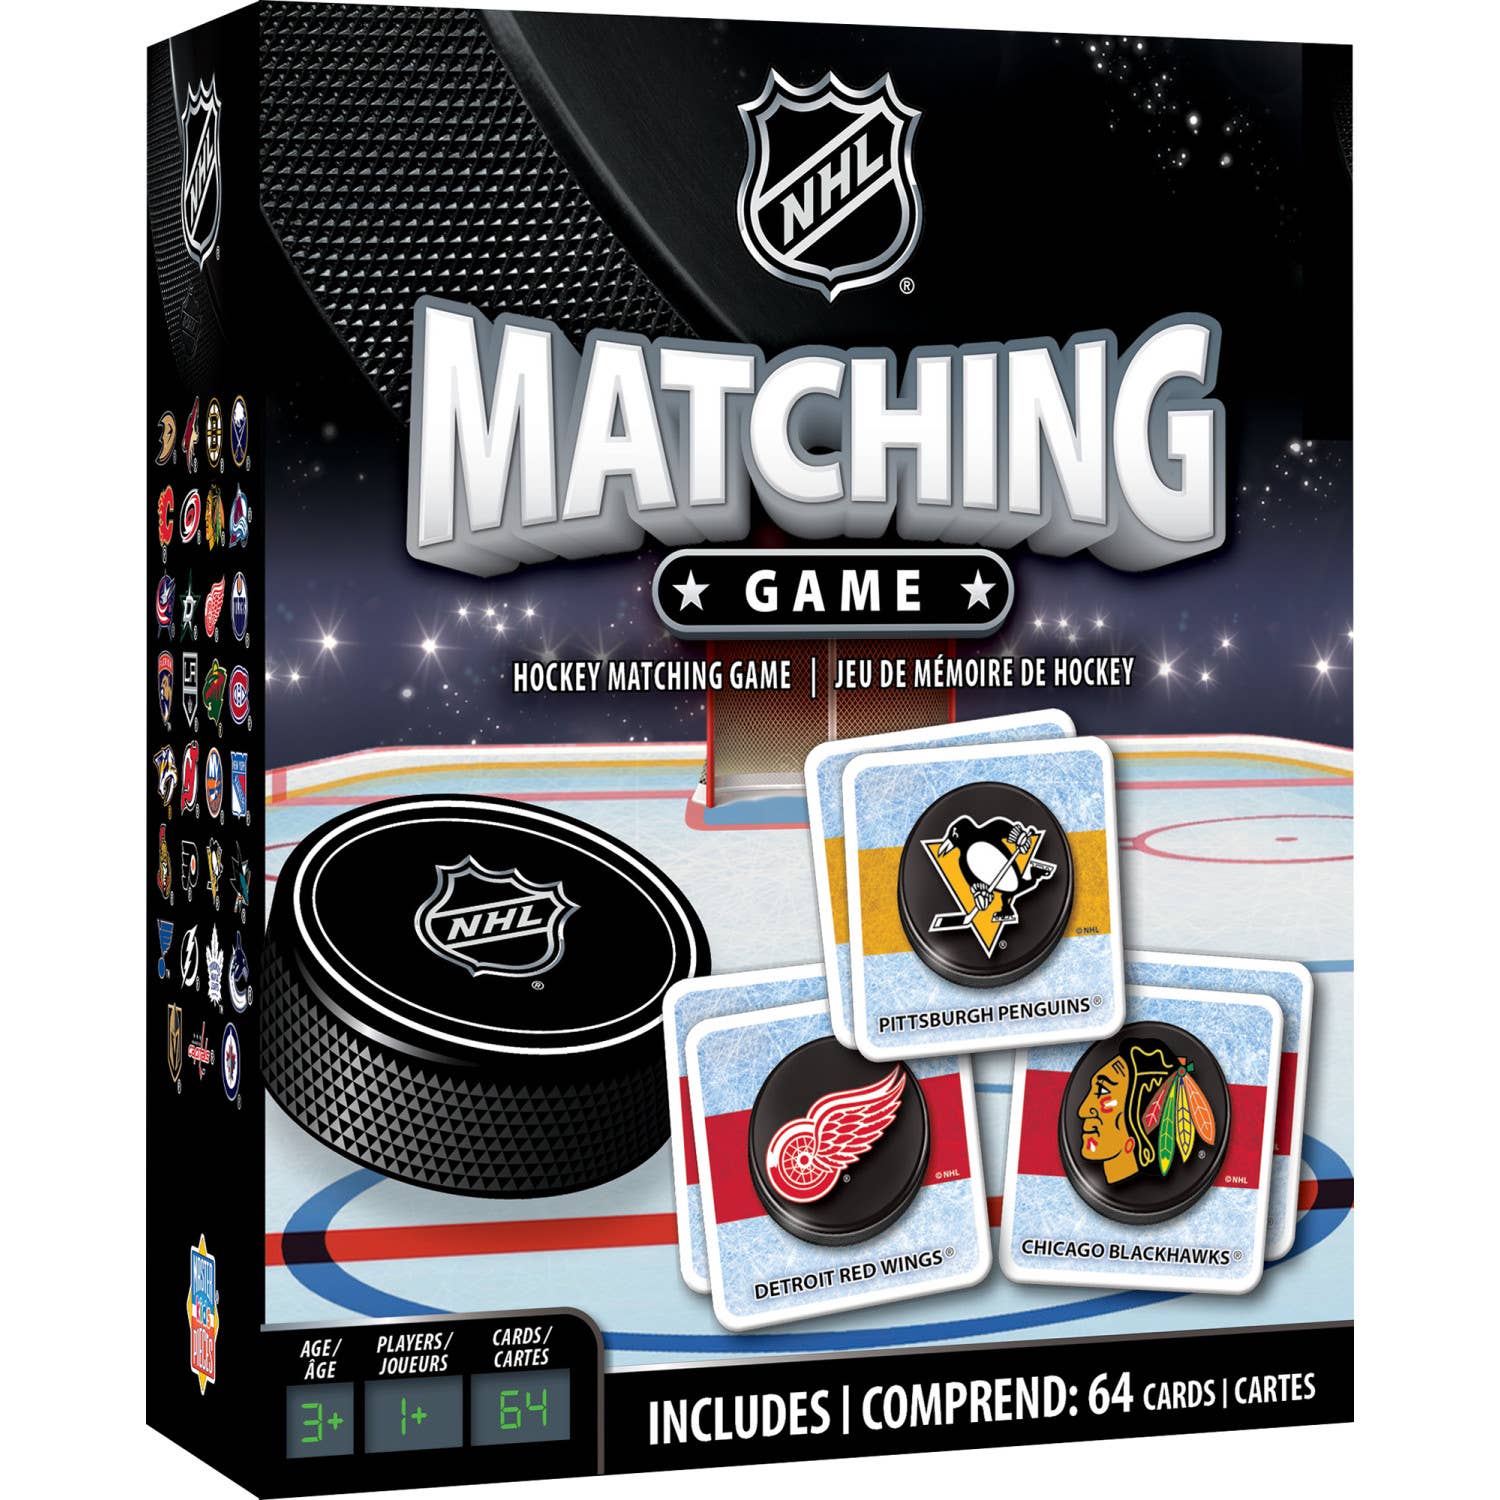 NHL League Matching Game